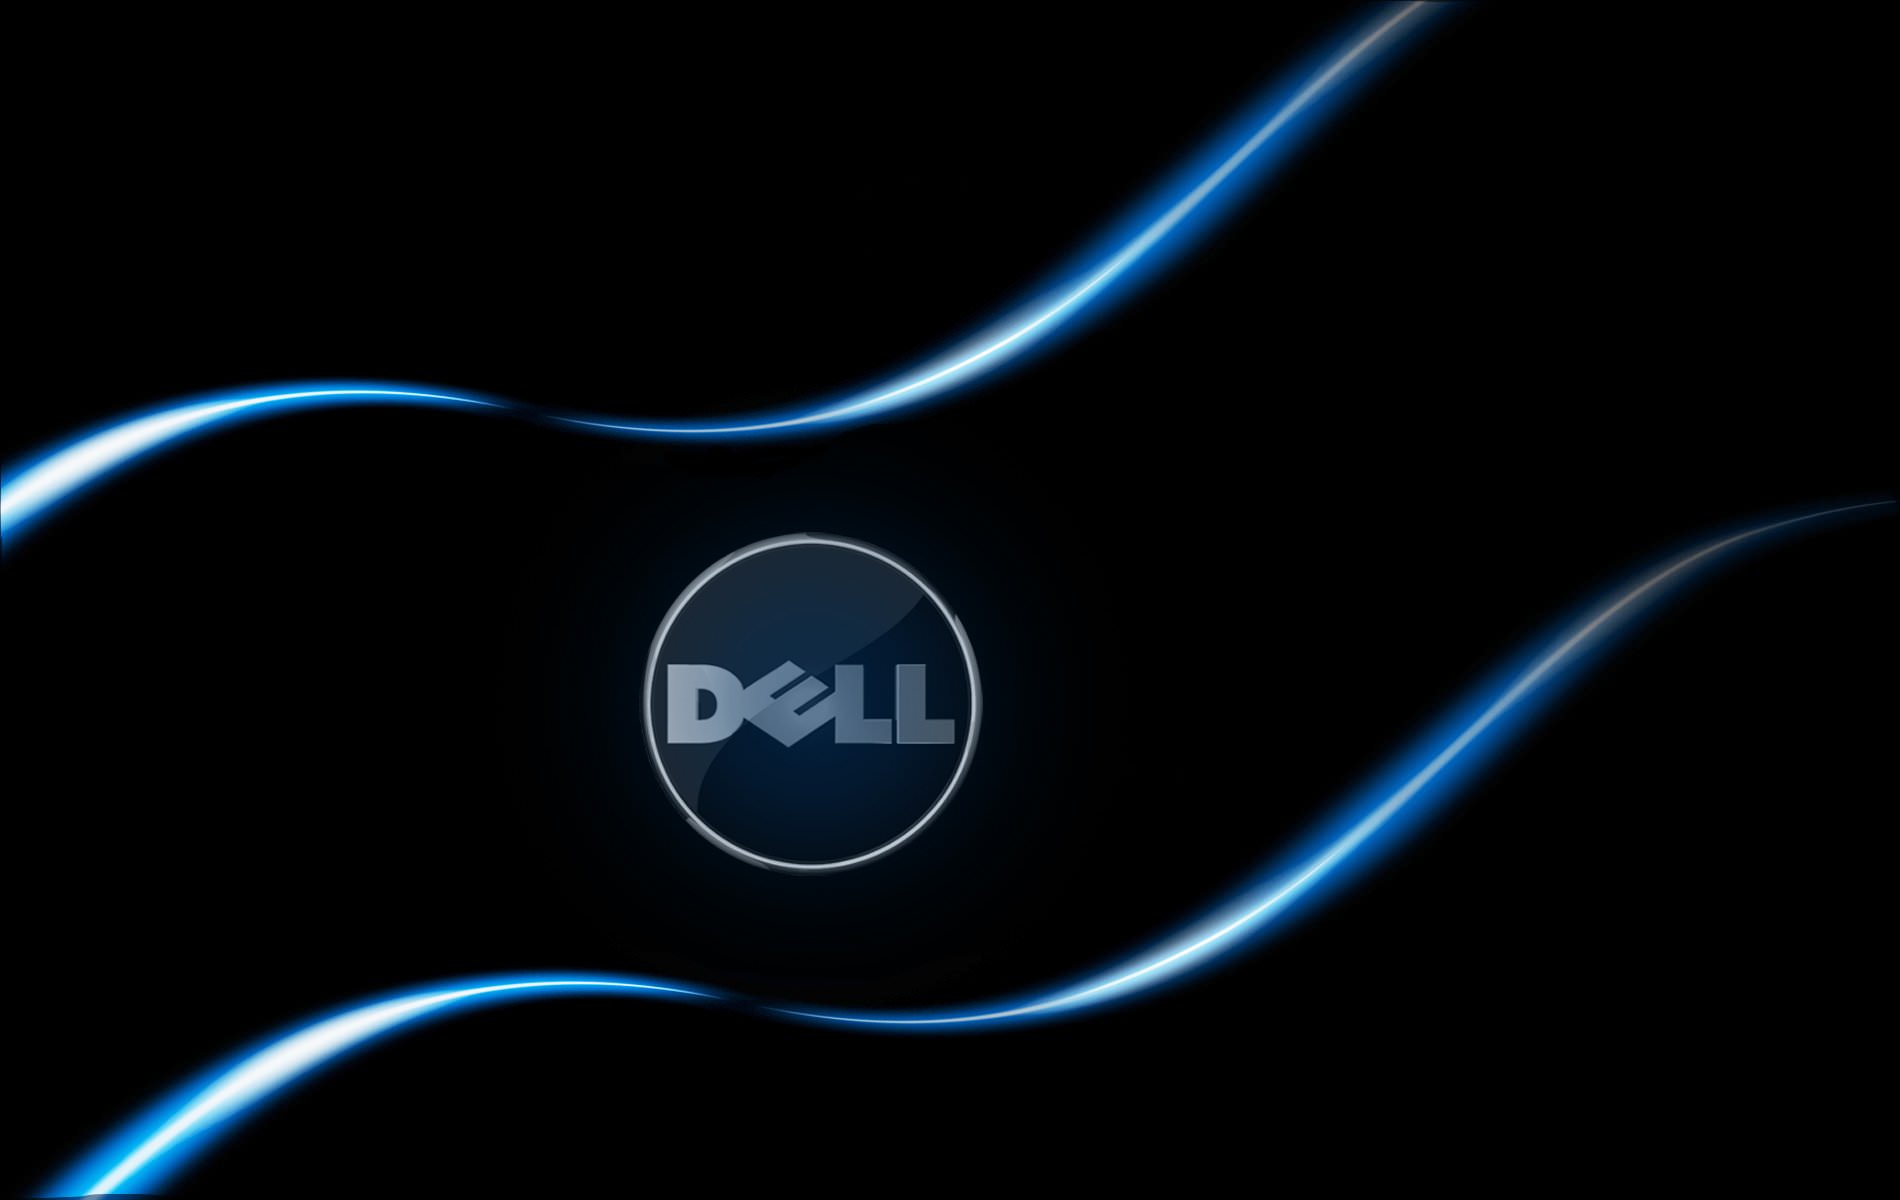 Hd Dell Backgrounds & Dell Wallpaper Images For Windows - Windows 10 Dell 3d - HD Wallpaper 